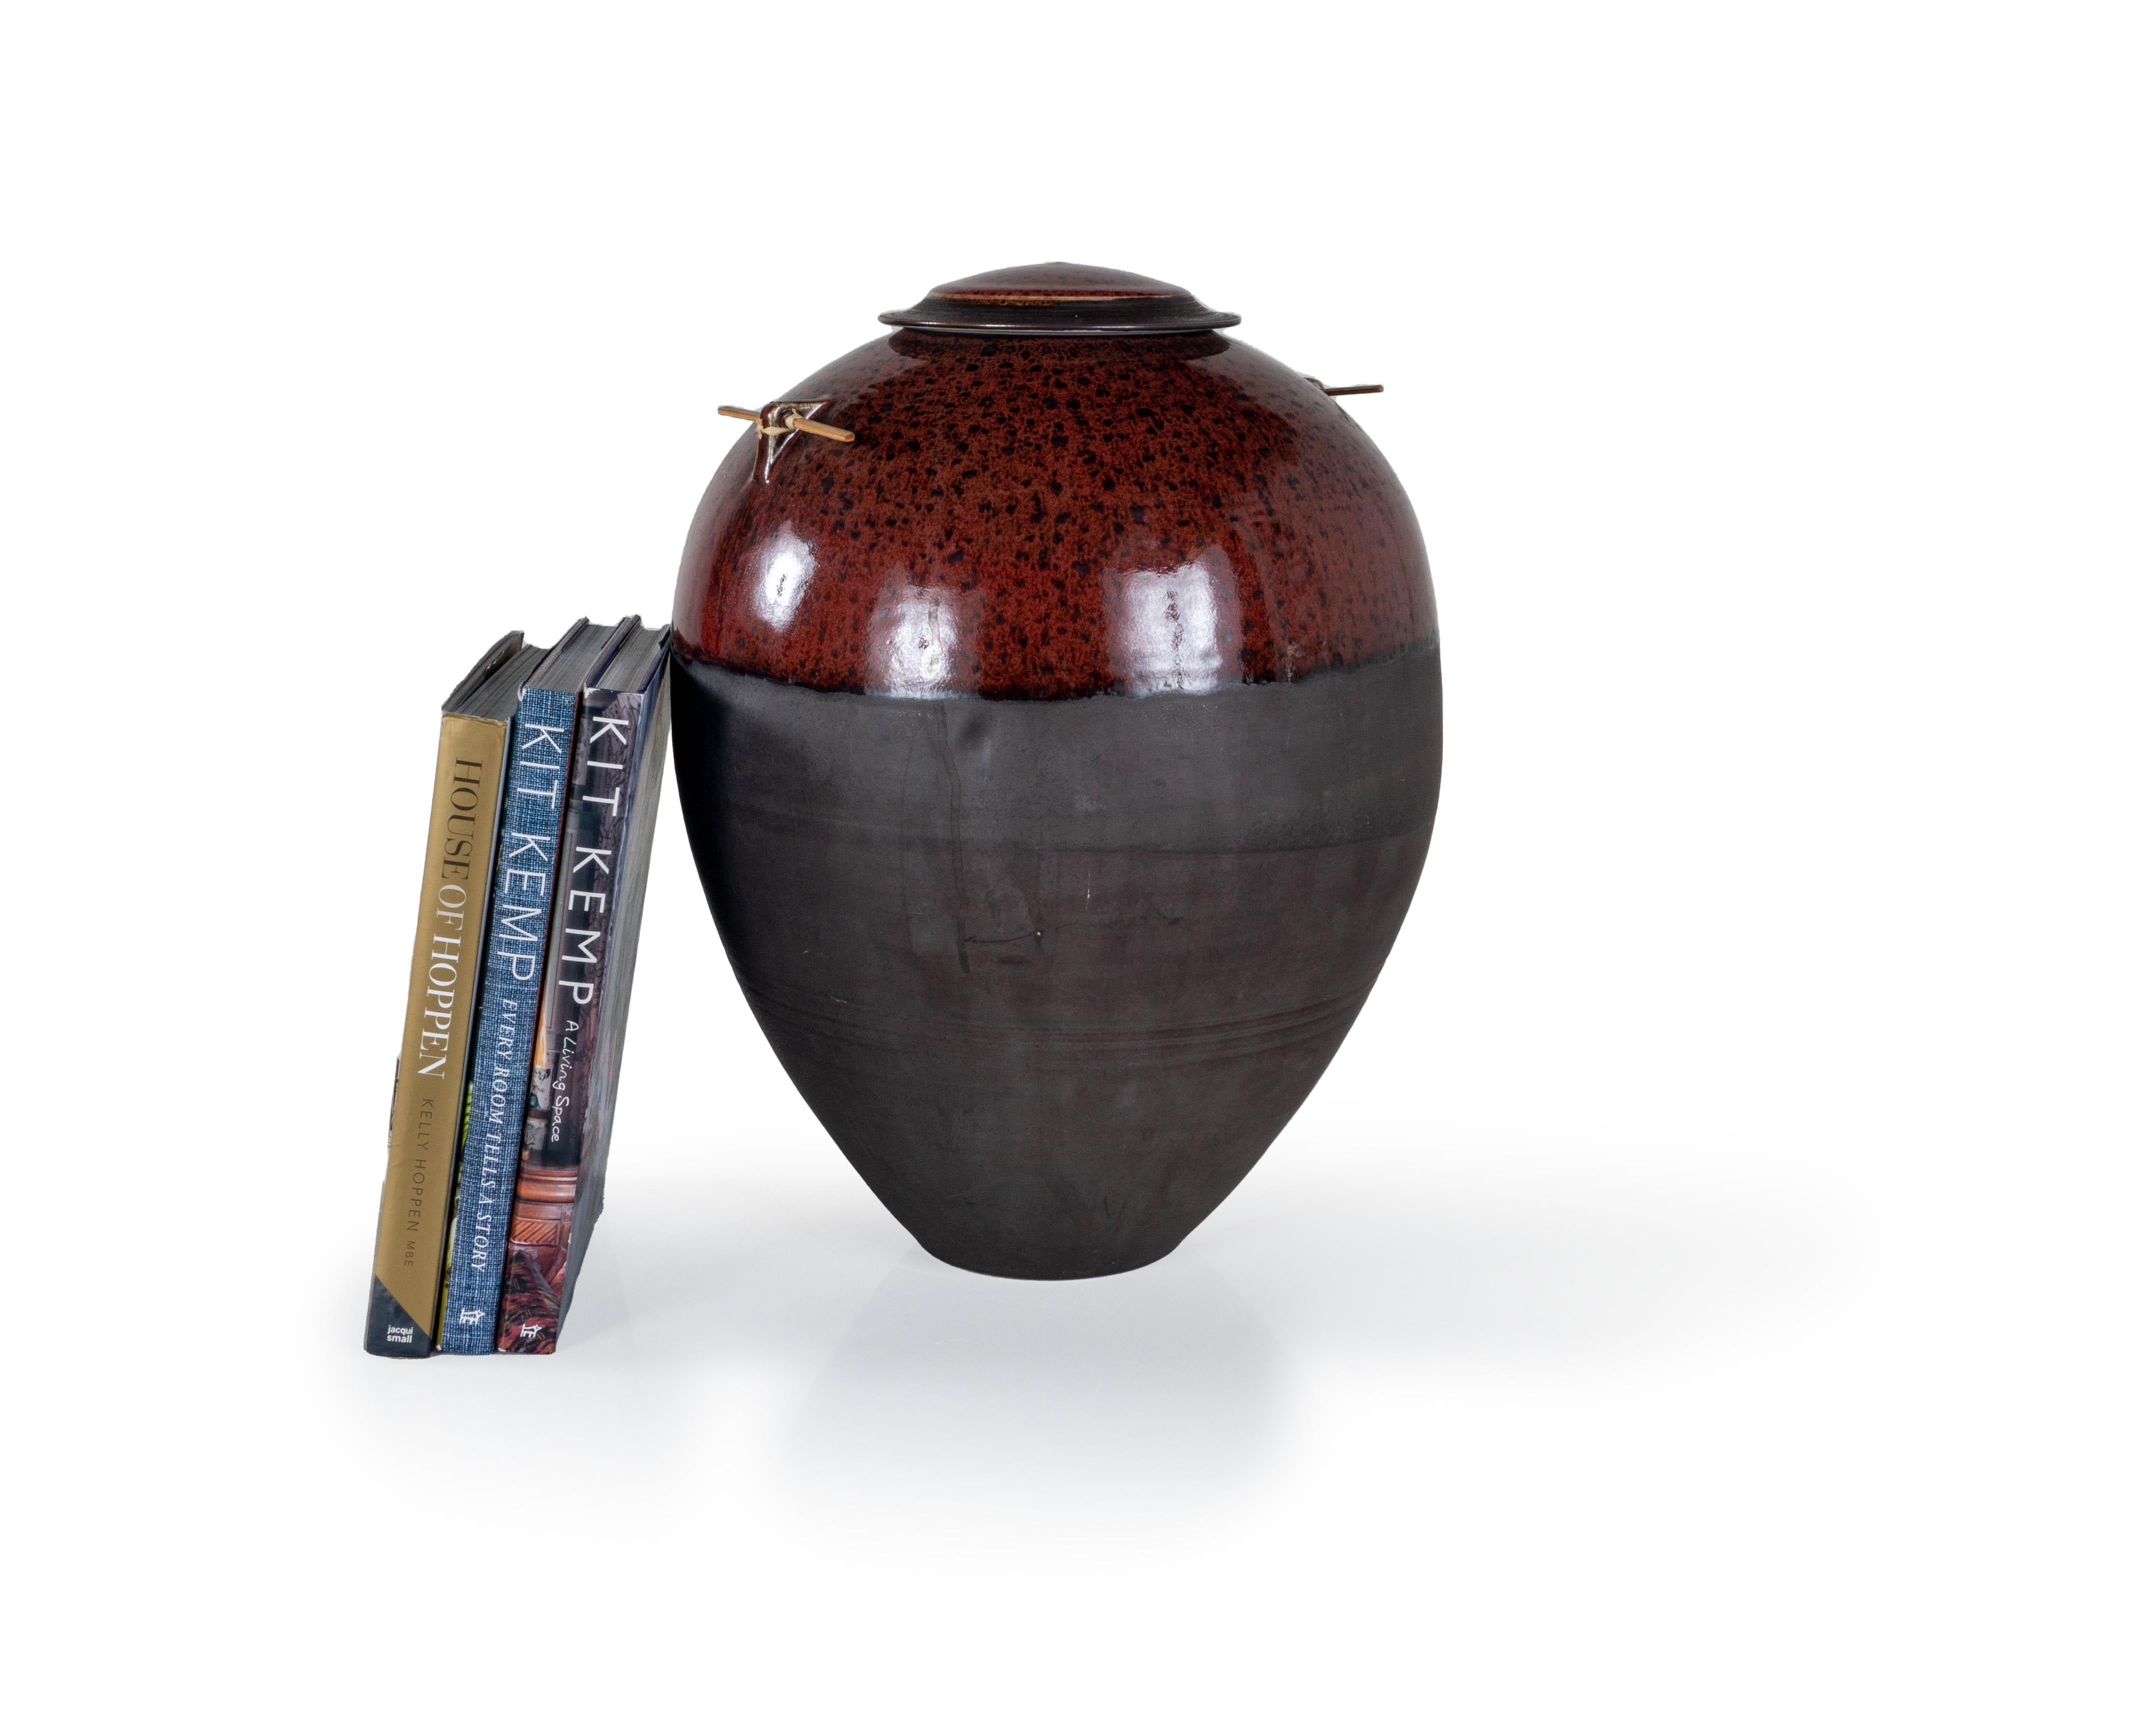 The Vintage Monumental Stephen Merritt Vase is a beautiful and unique form of pottery that was created by the artist Stephen Merritt in the mid-century modern era. This ceramic jar features split bamboo handles and a ginger jar body with removable